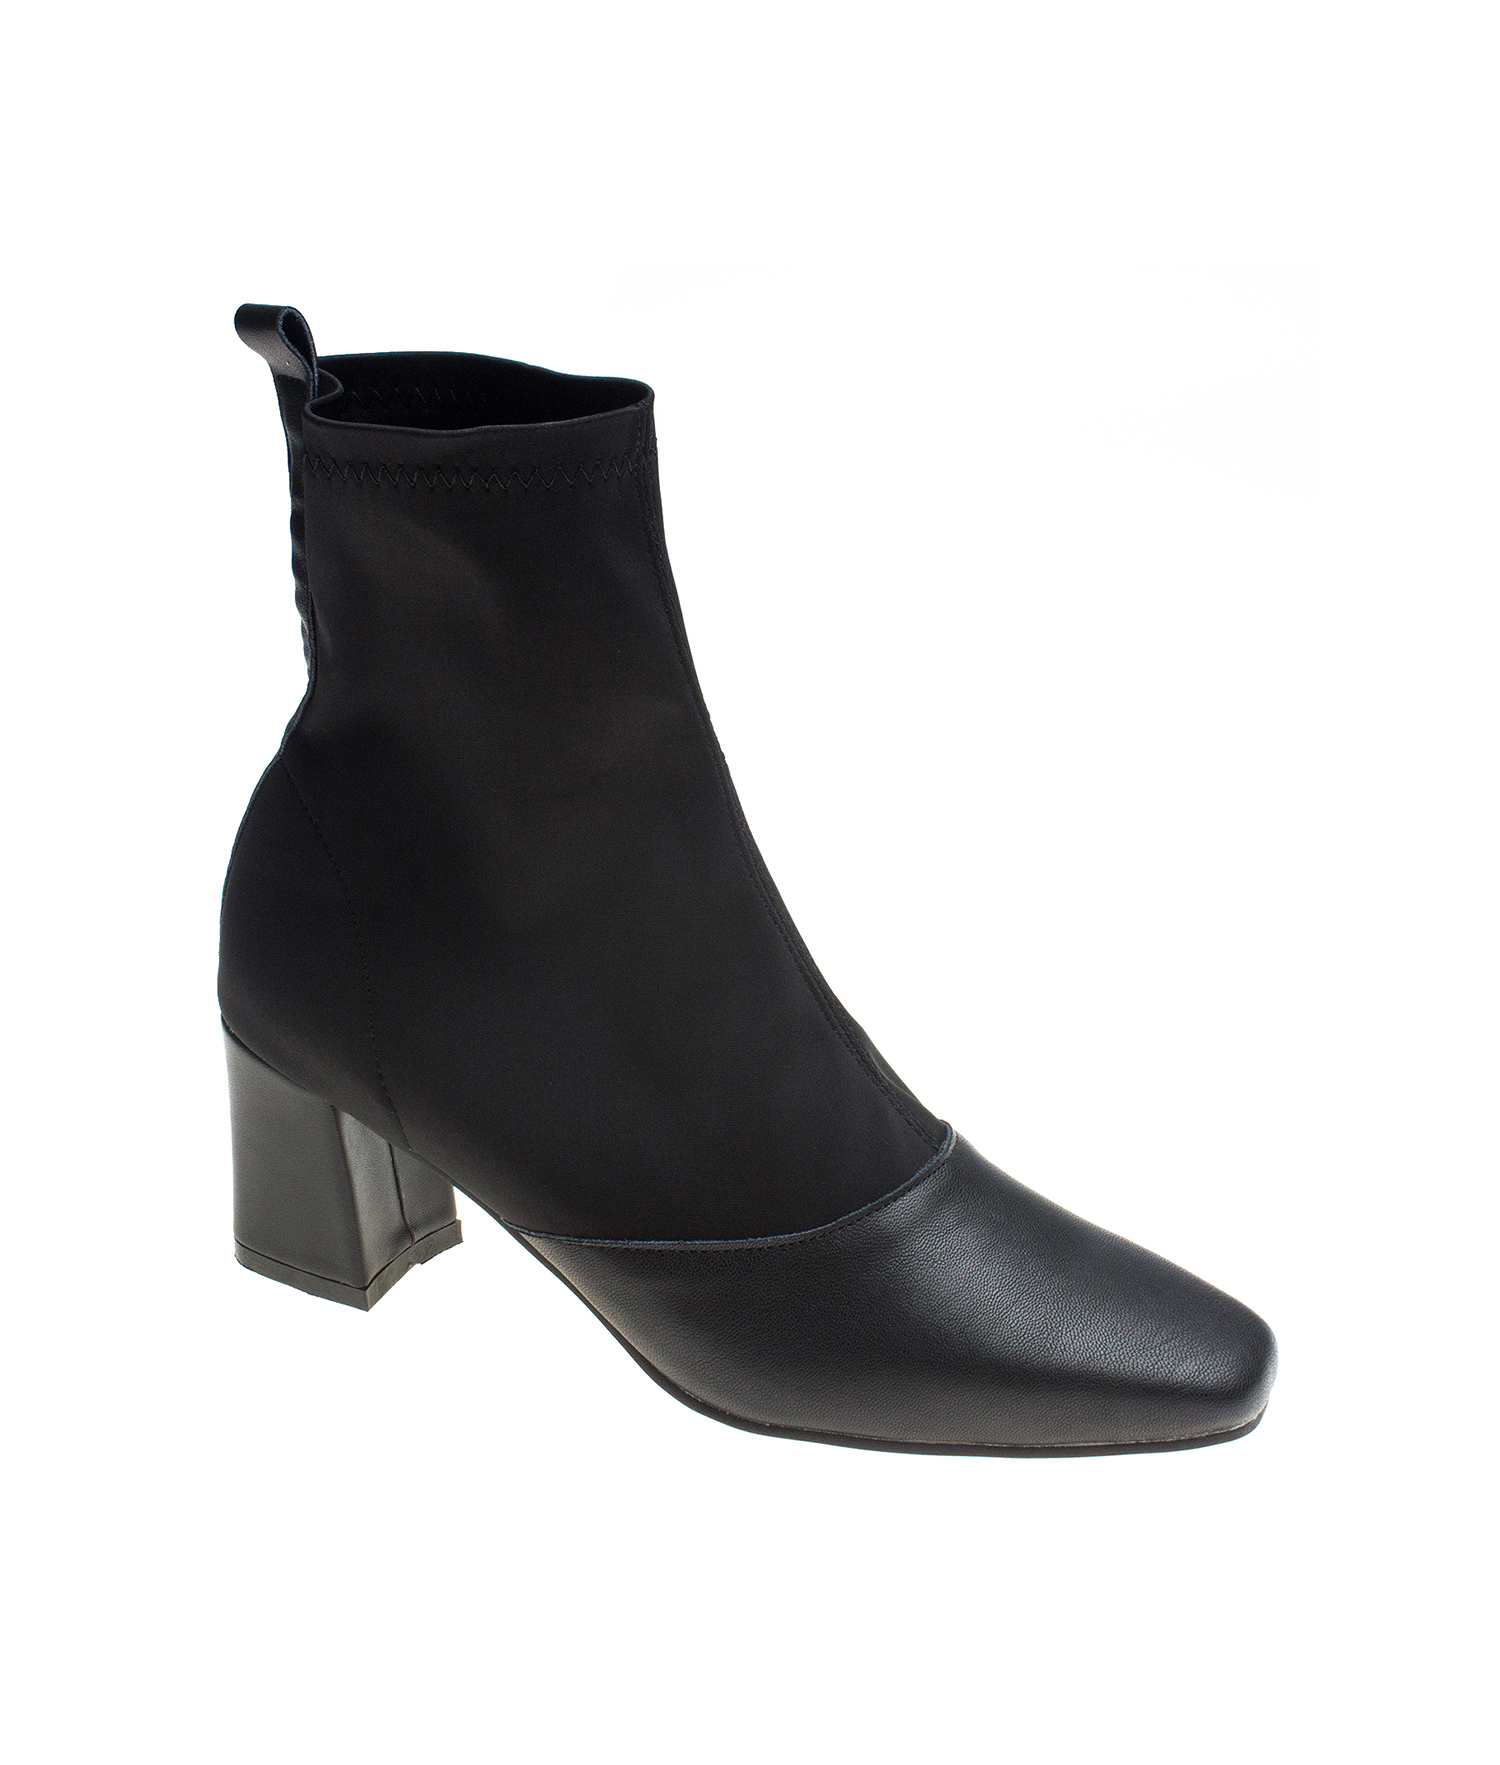 Stretch Shaft Leather Heel Boots Bootie 